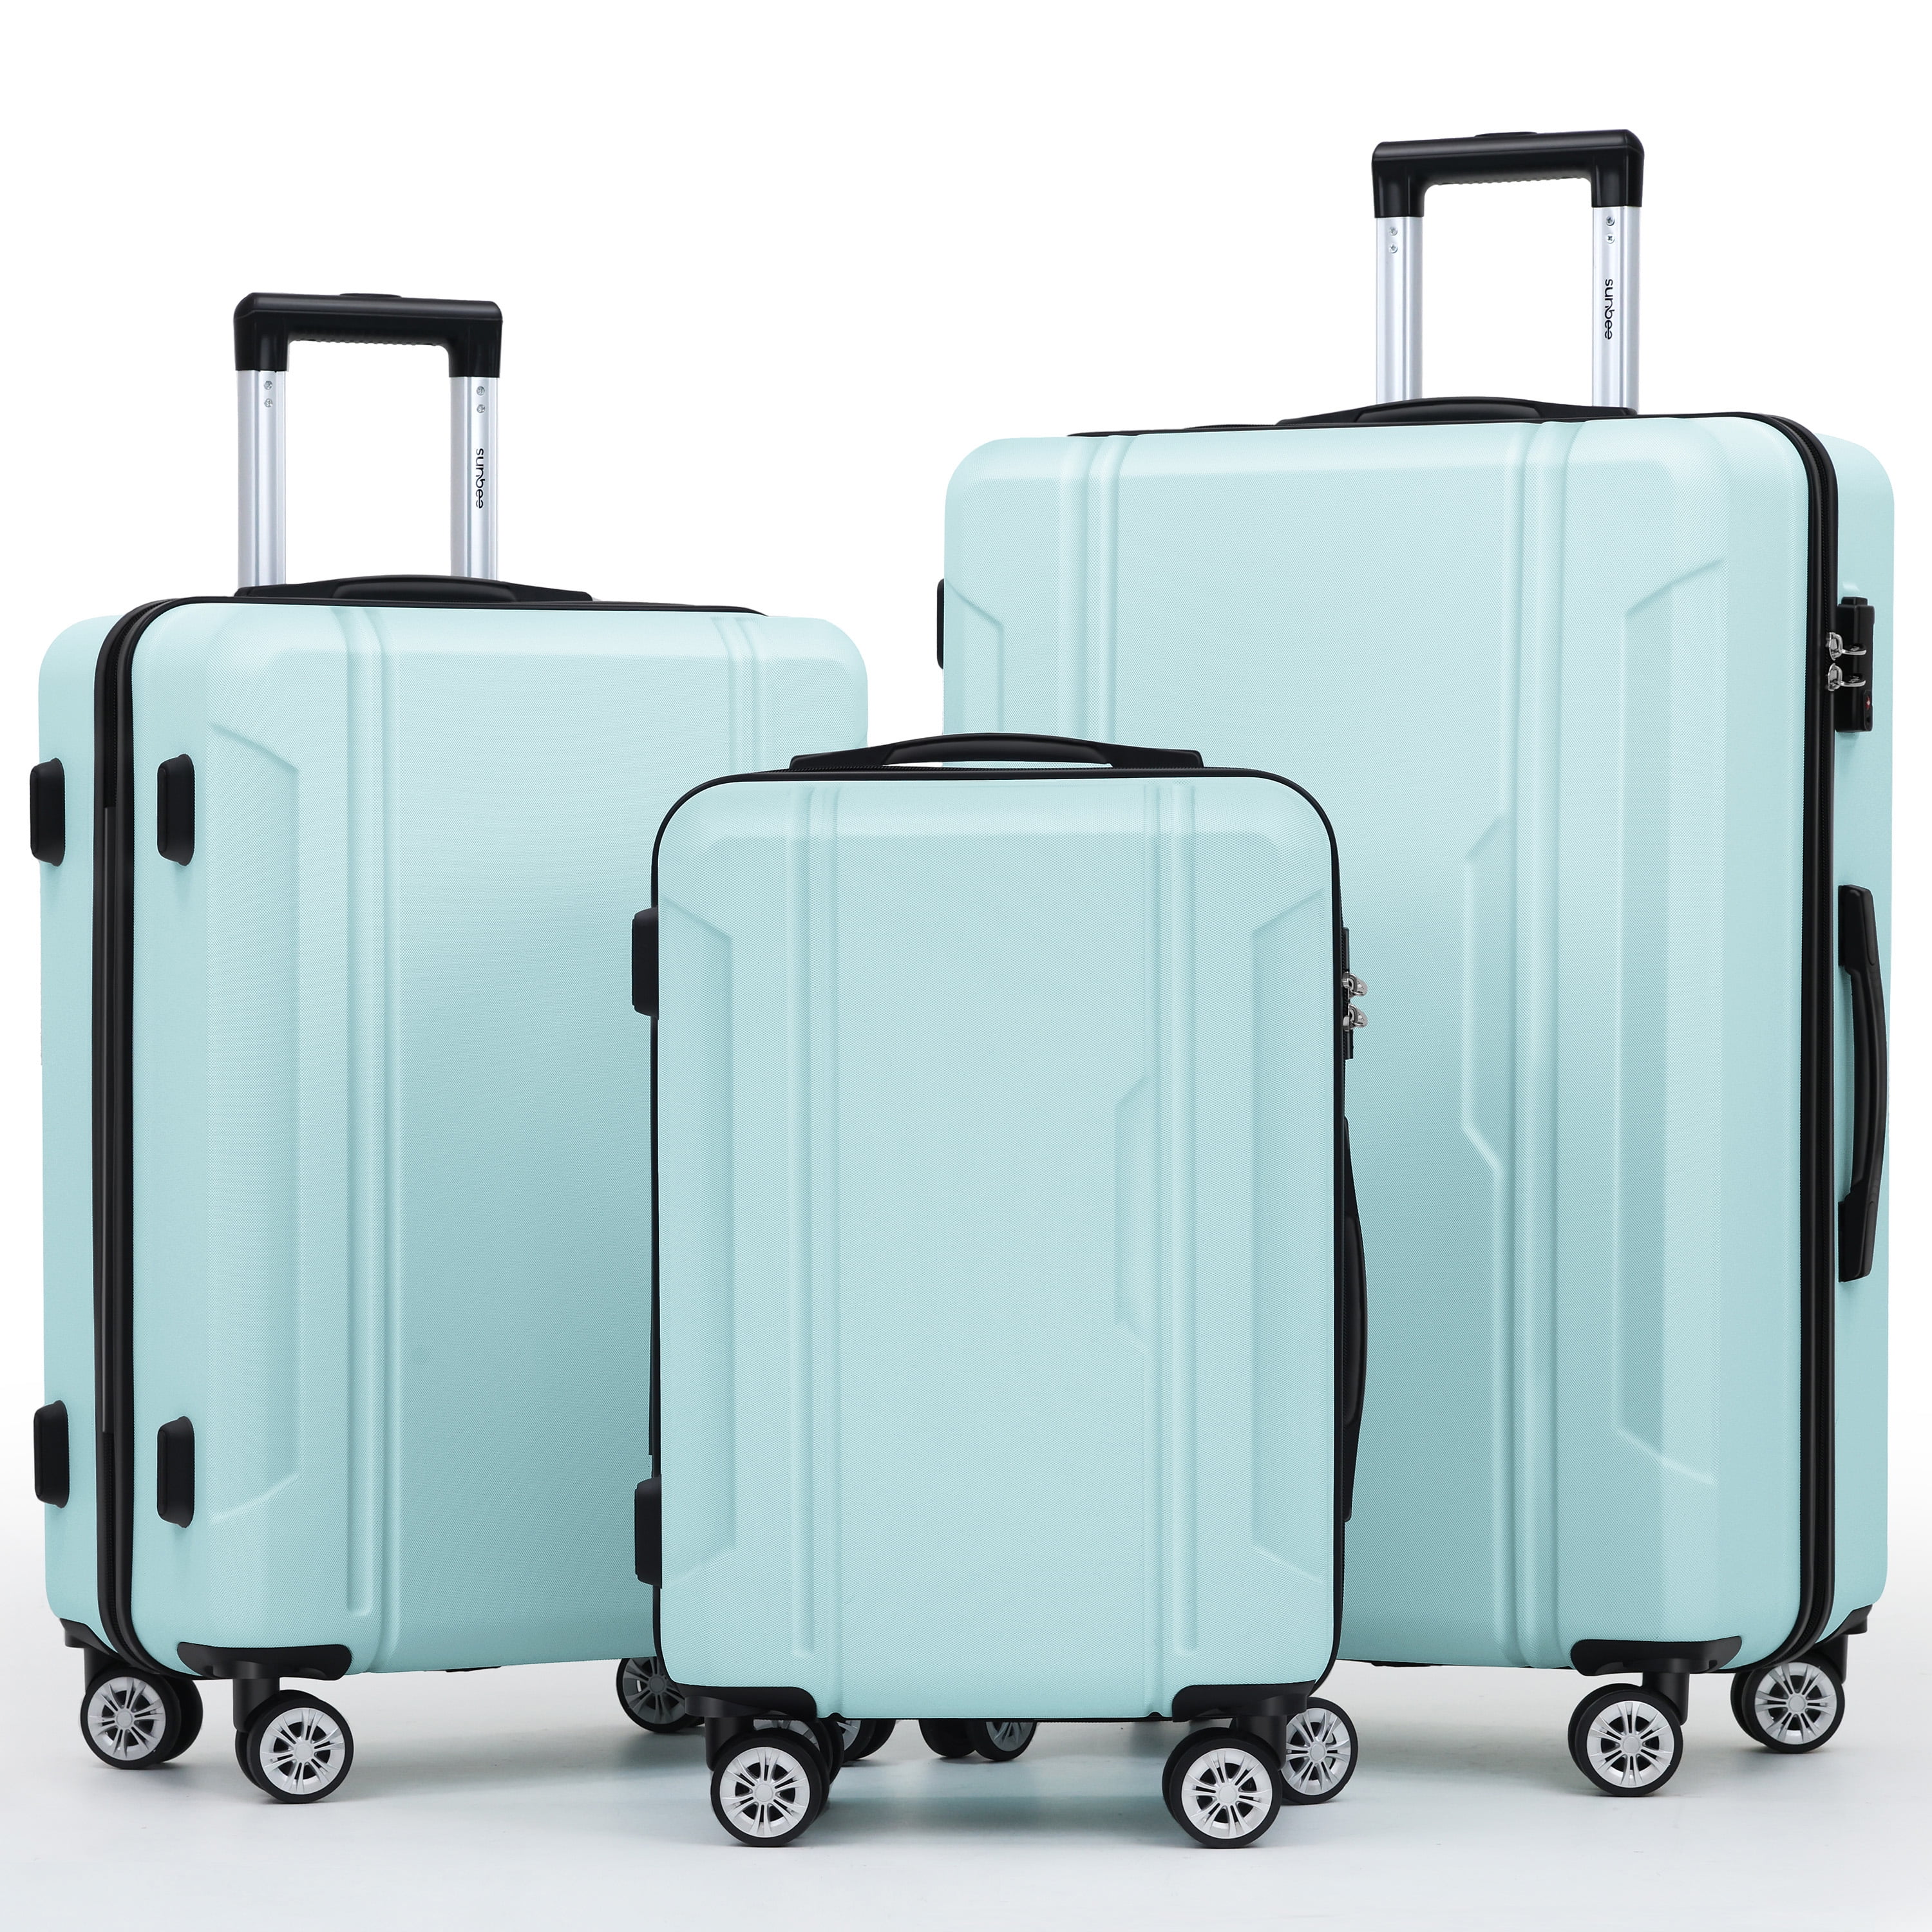 Luggage Sets - 2 or 3 Piece Mix & Match Travel Suitcase Sets